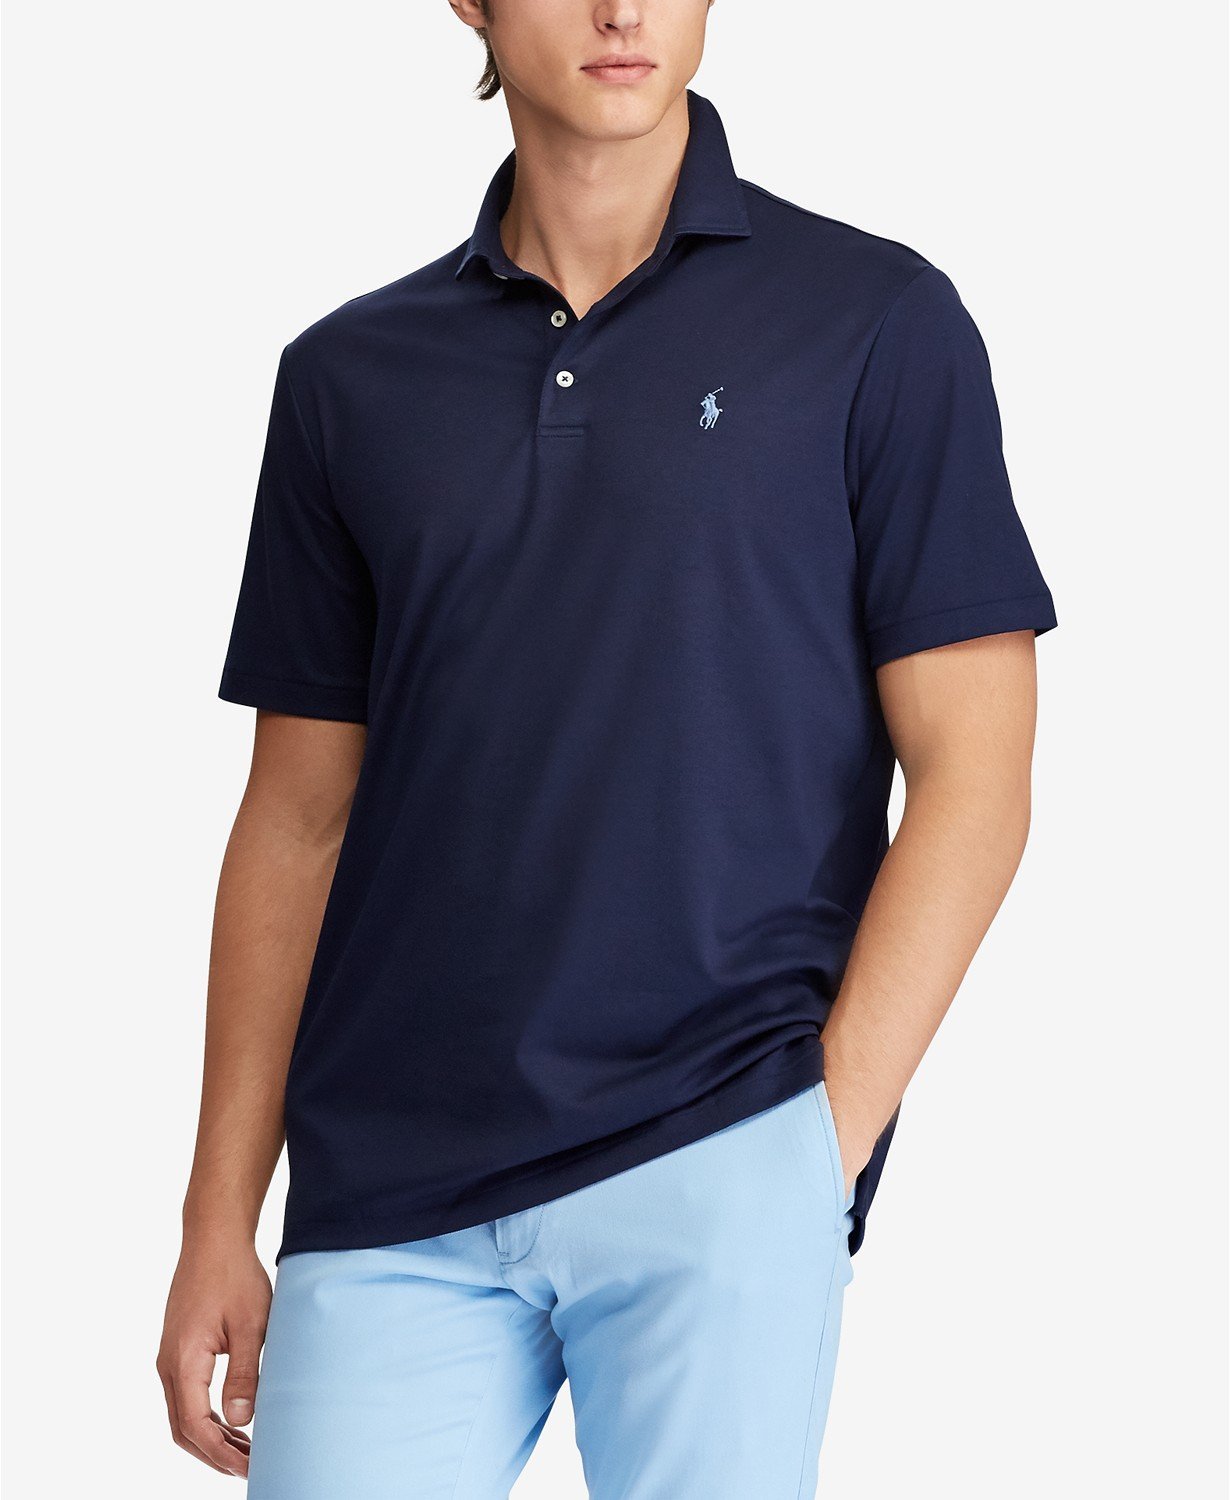 Polo Ralph Lauren Men'S Slim Fit Soft Touch Polo Shirt - Faded Royal  Heather - S for Men